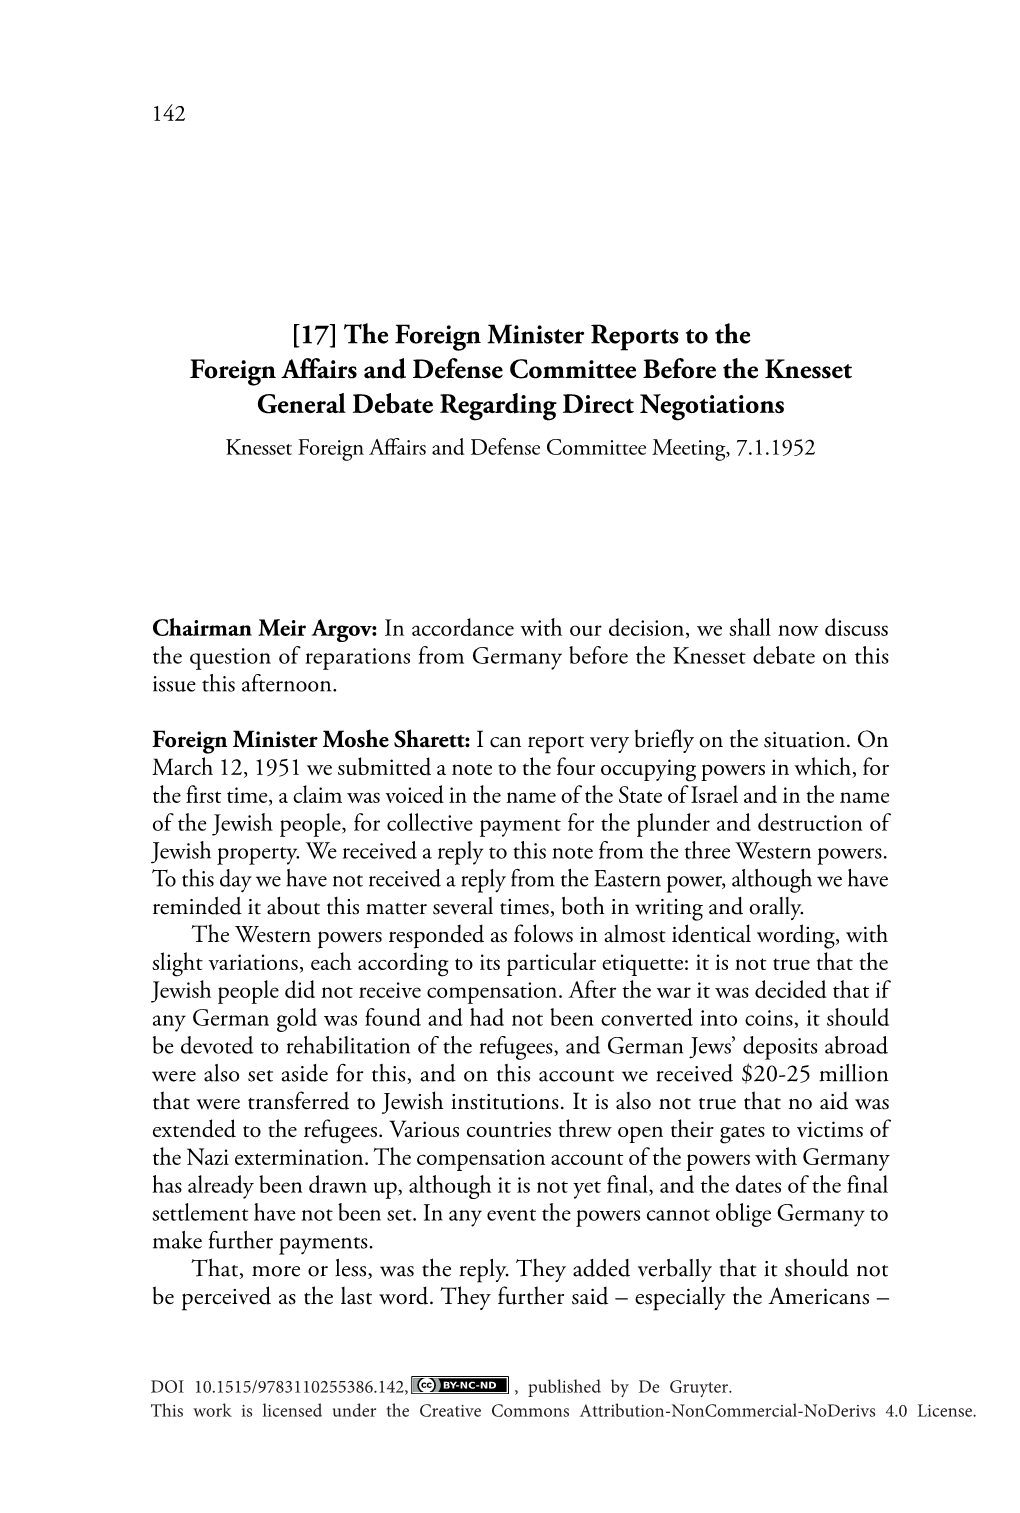 [17] the Foreign Minister Reports to the Foreign Affairs and Defense